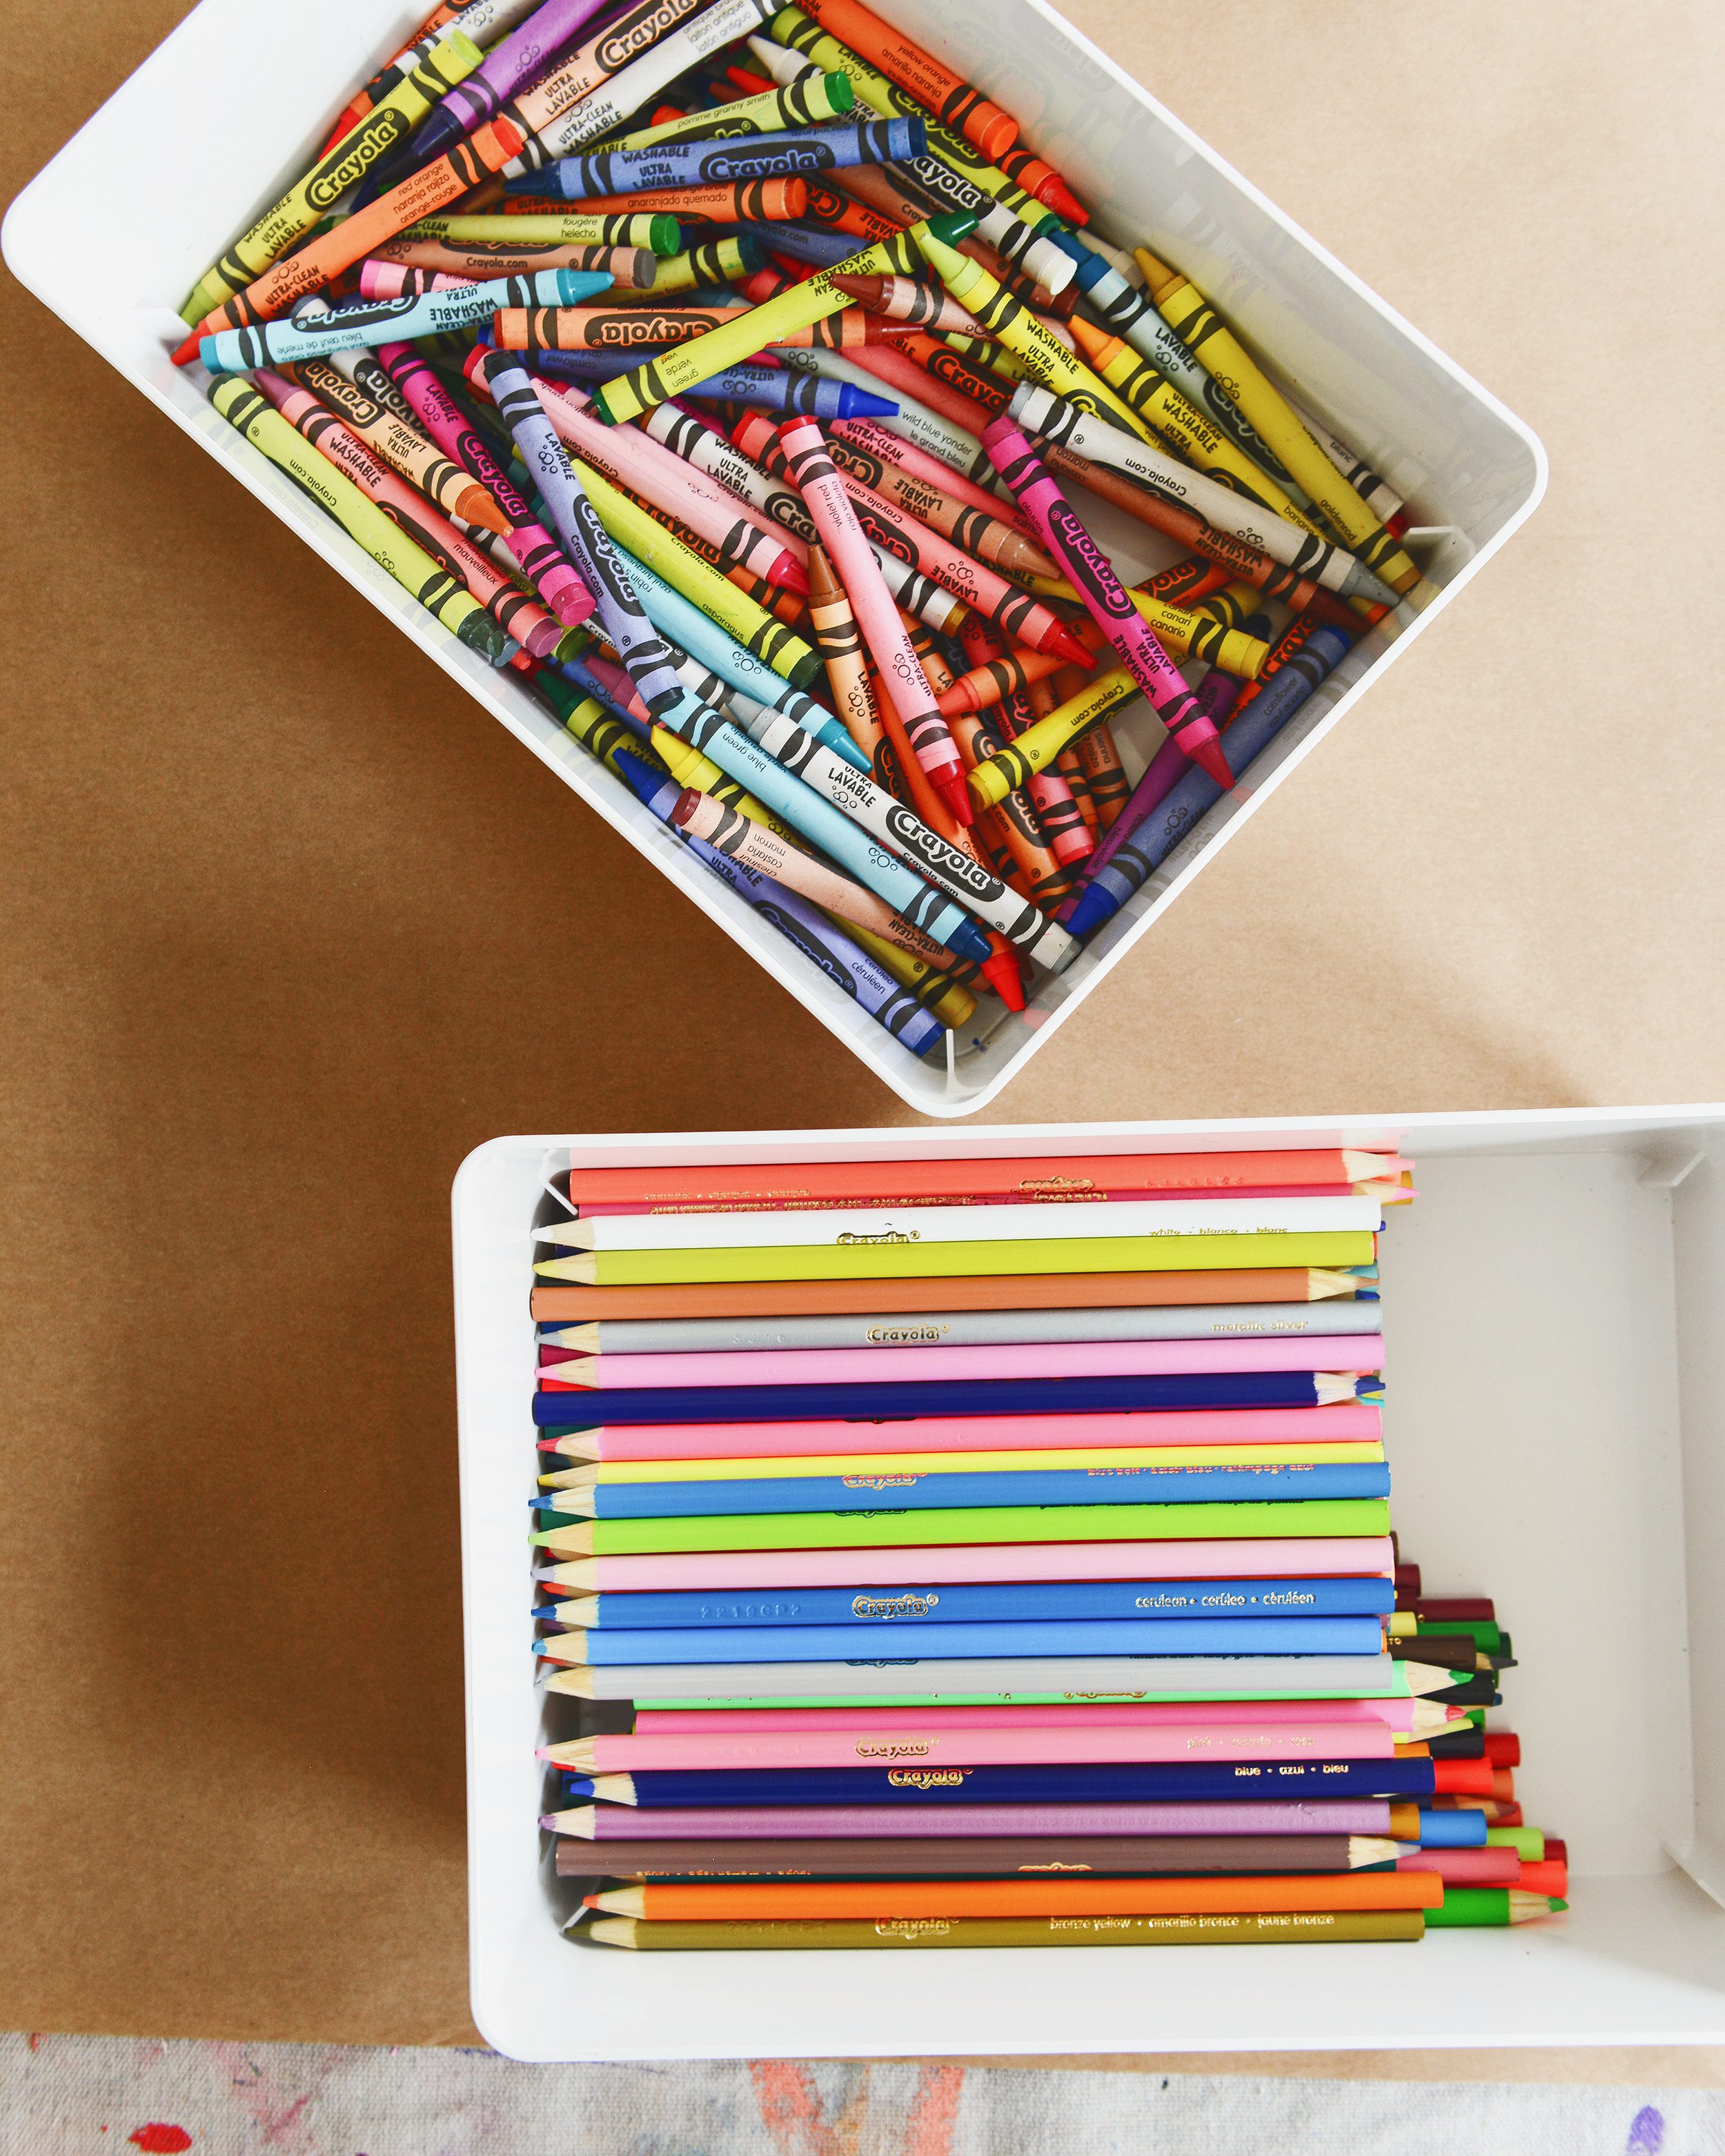 Crayons and colored pencils in art bins | How to have a successful family art party! via Yellow Brick Home